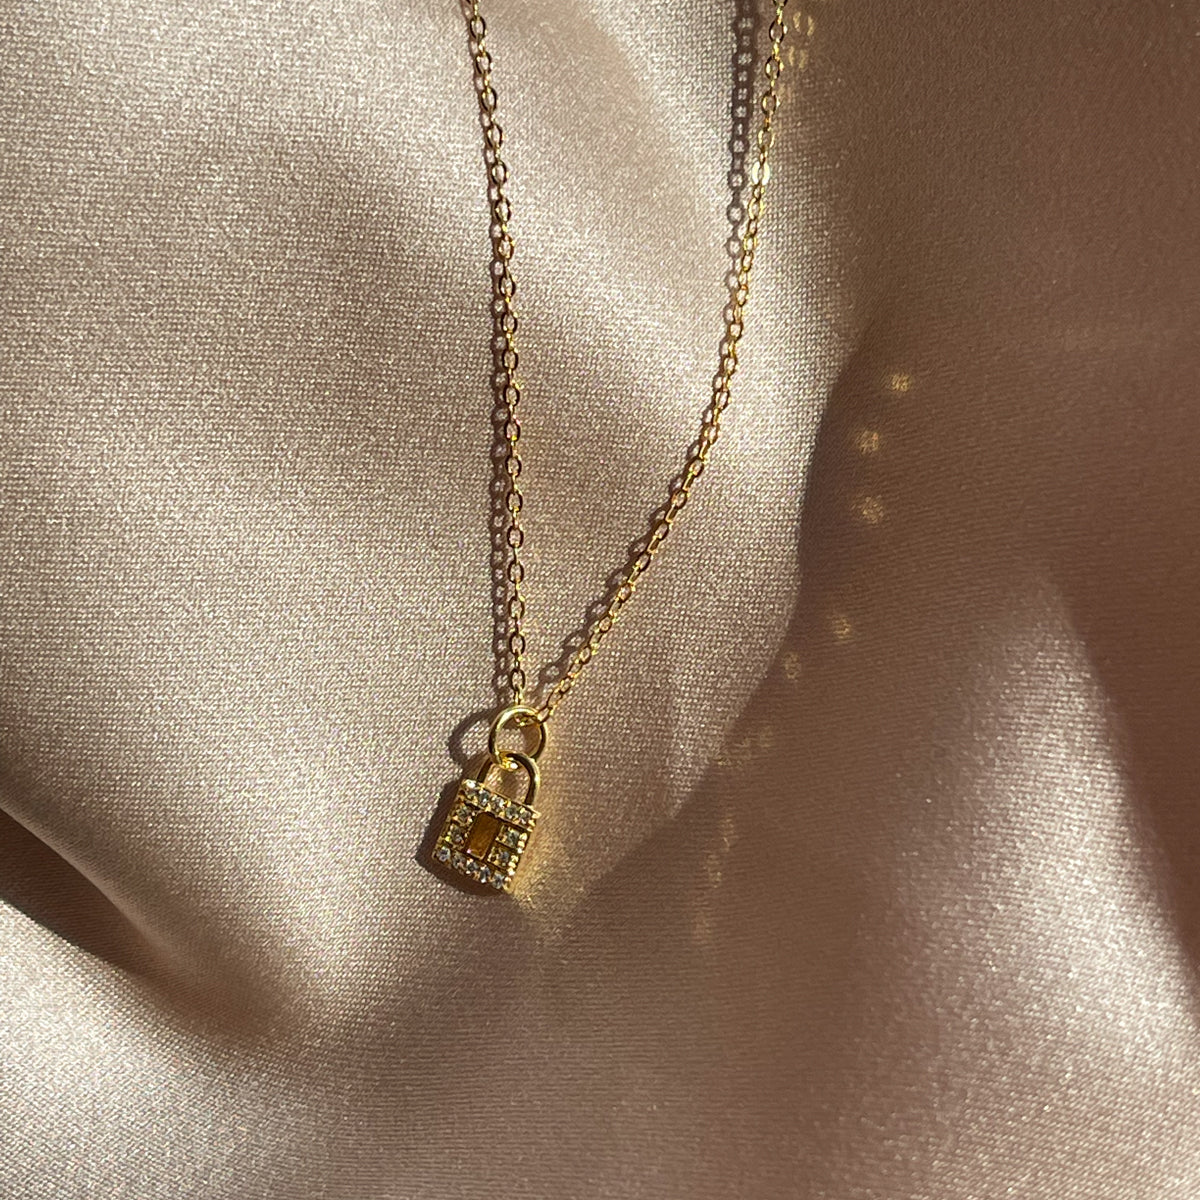 Gold Cutting Edge Pendant and Dainty Chain Necklace | Uncommon James